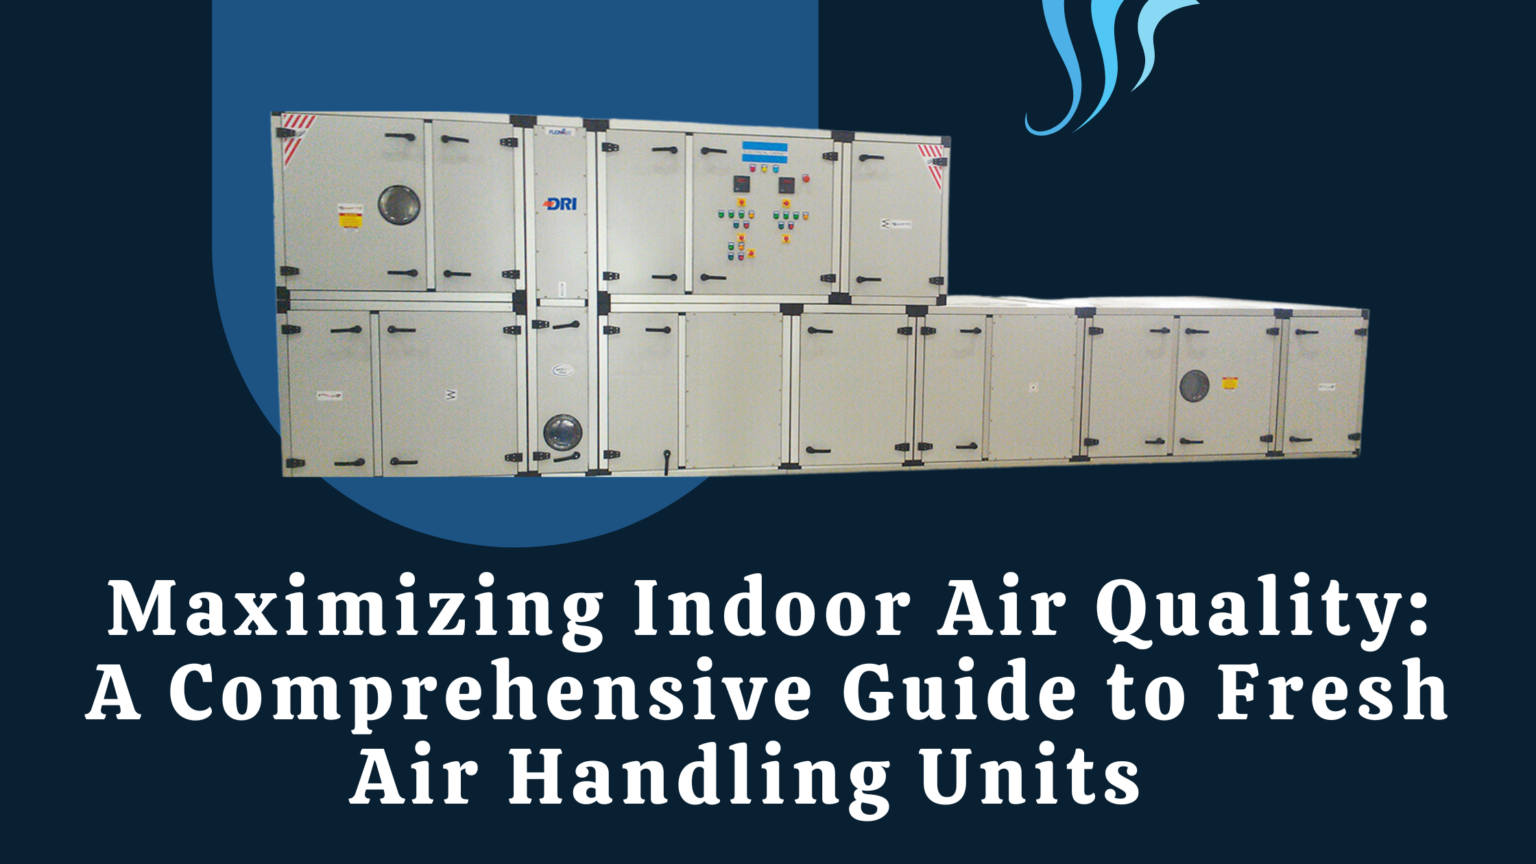 Maximizing Indoor Air Quality: A Comprehensive Guide to Fresh Air Handling Units